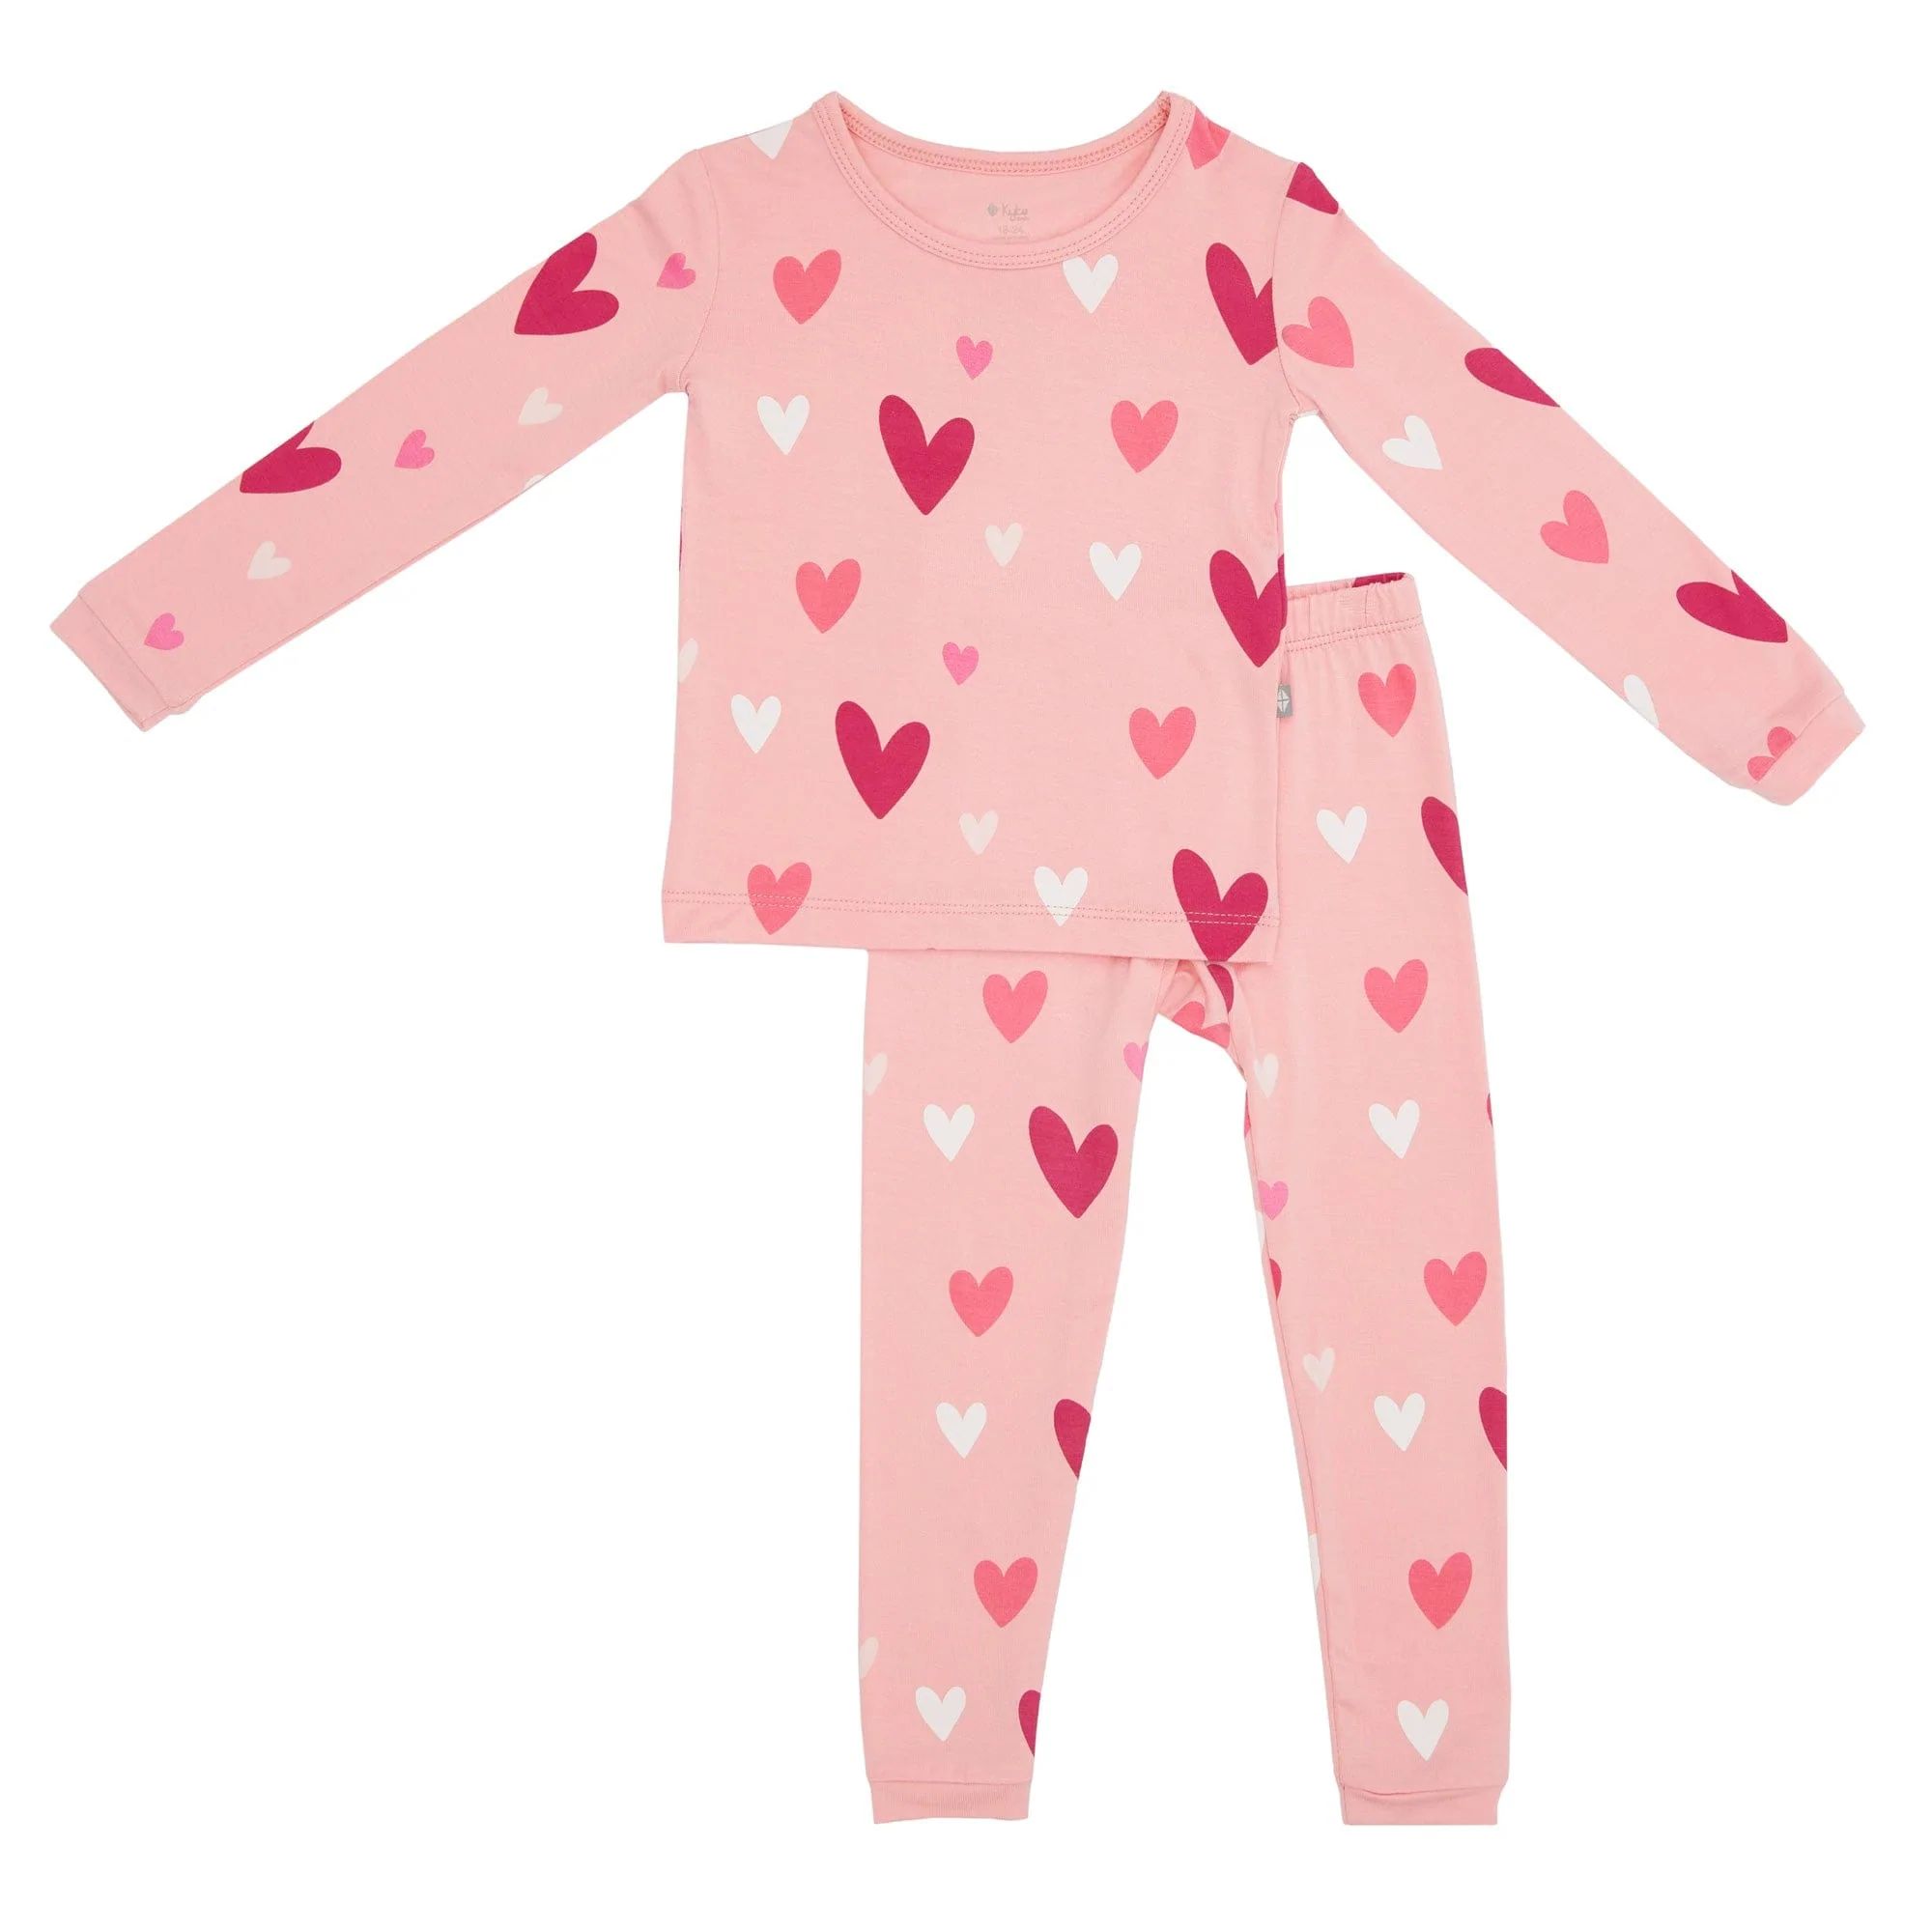 Toddler Pajama Set in Crepe Hearts | Kyte BABY